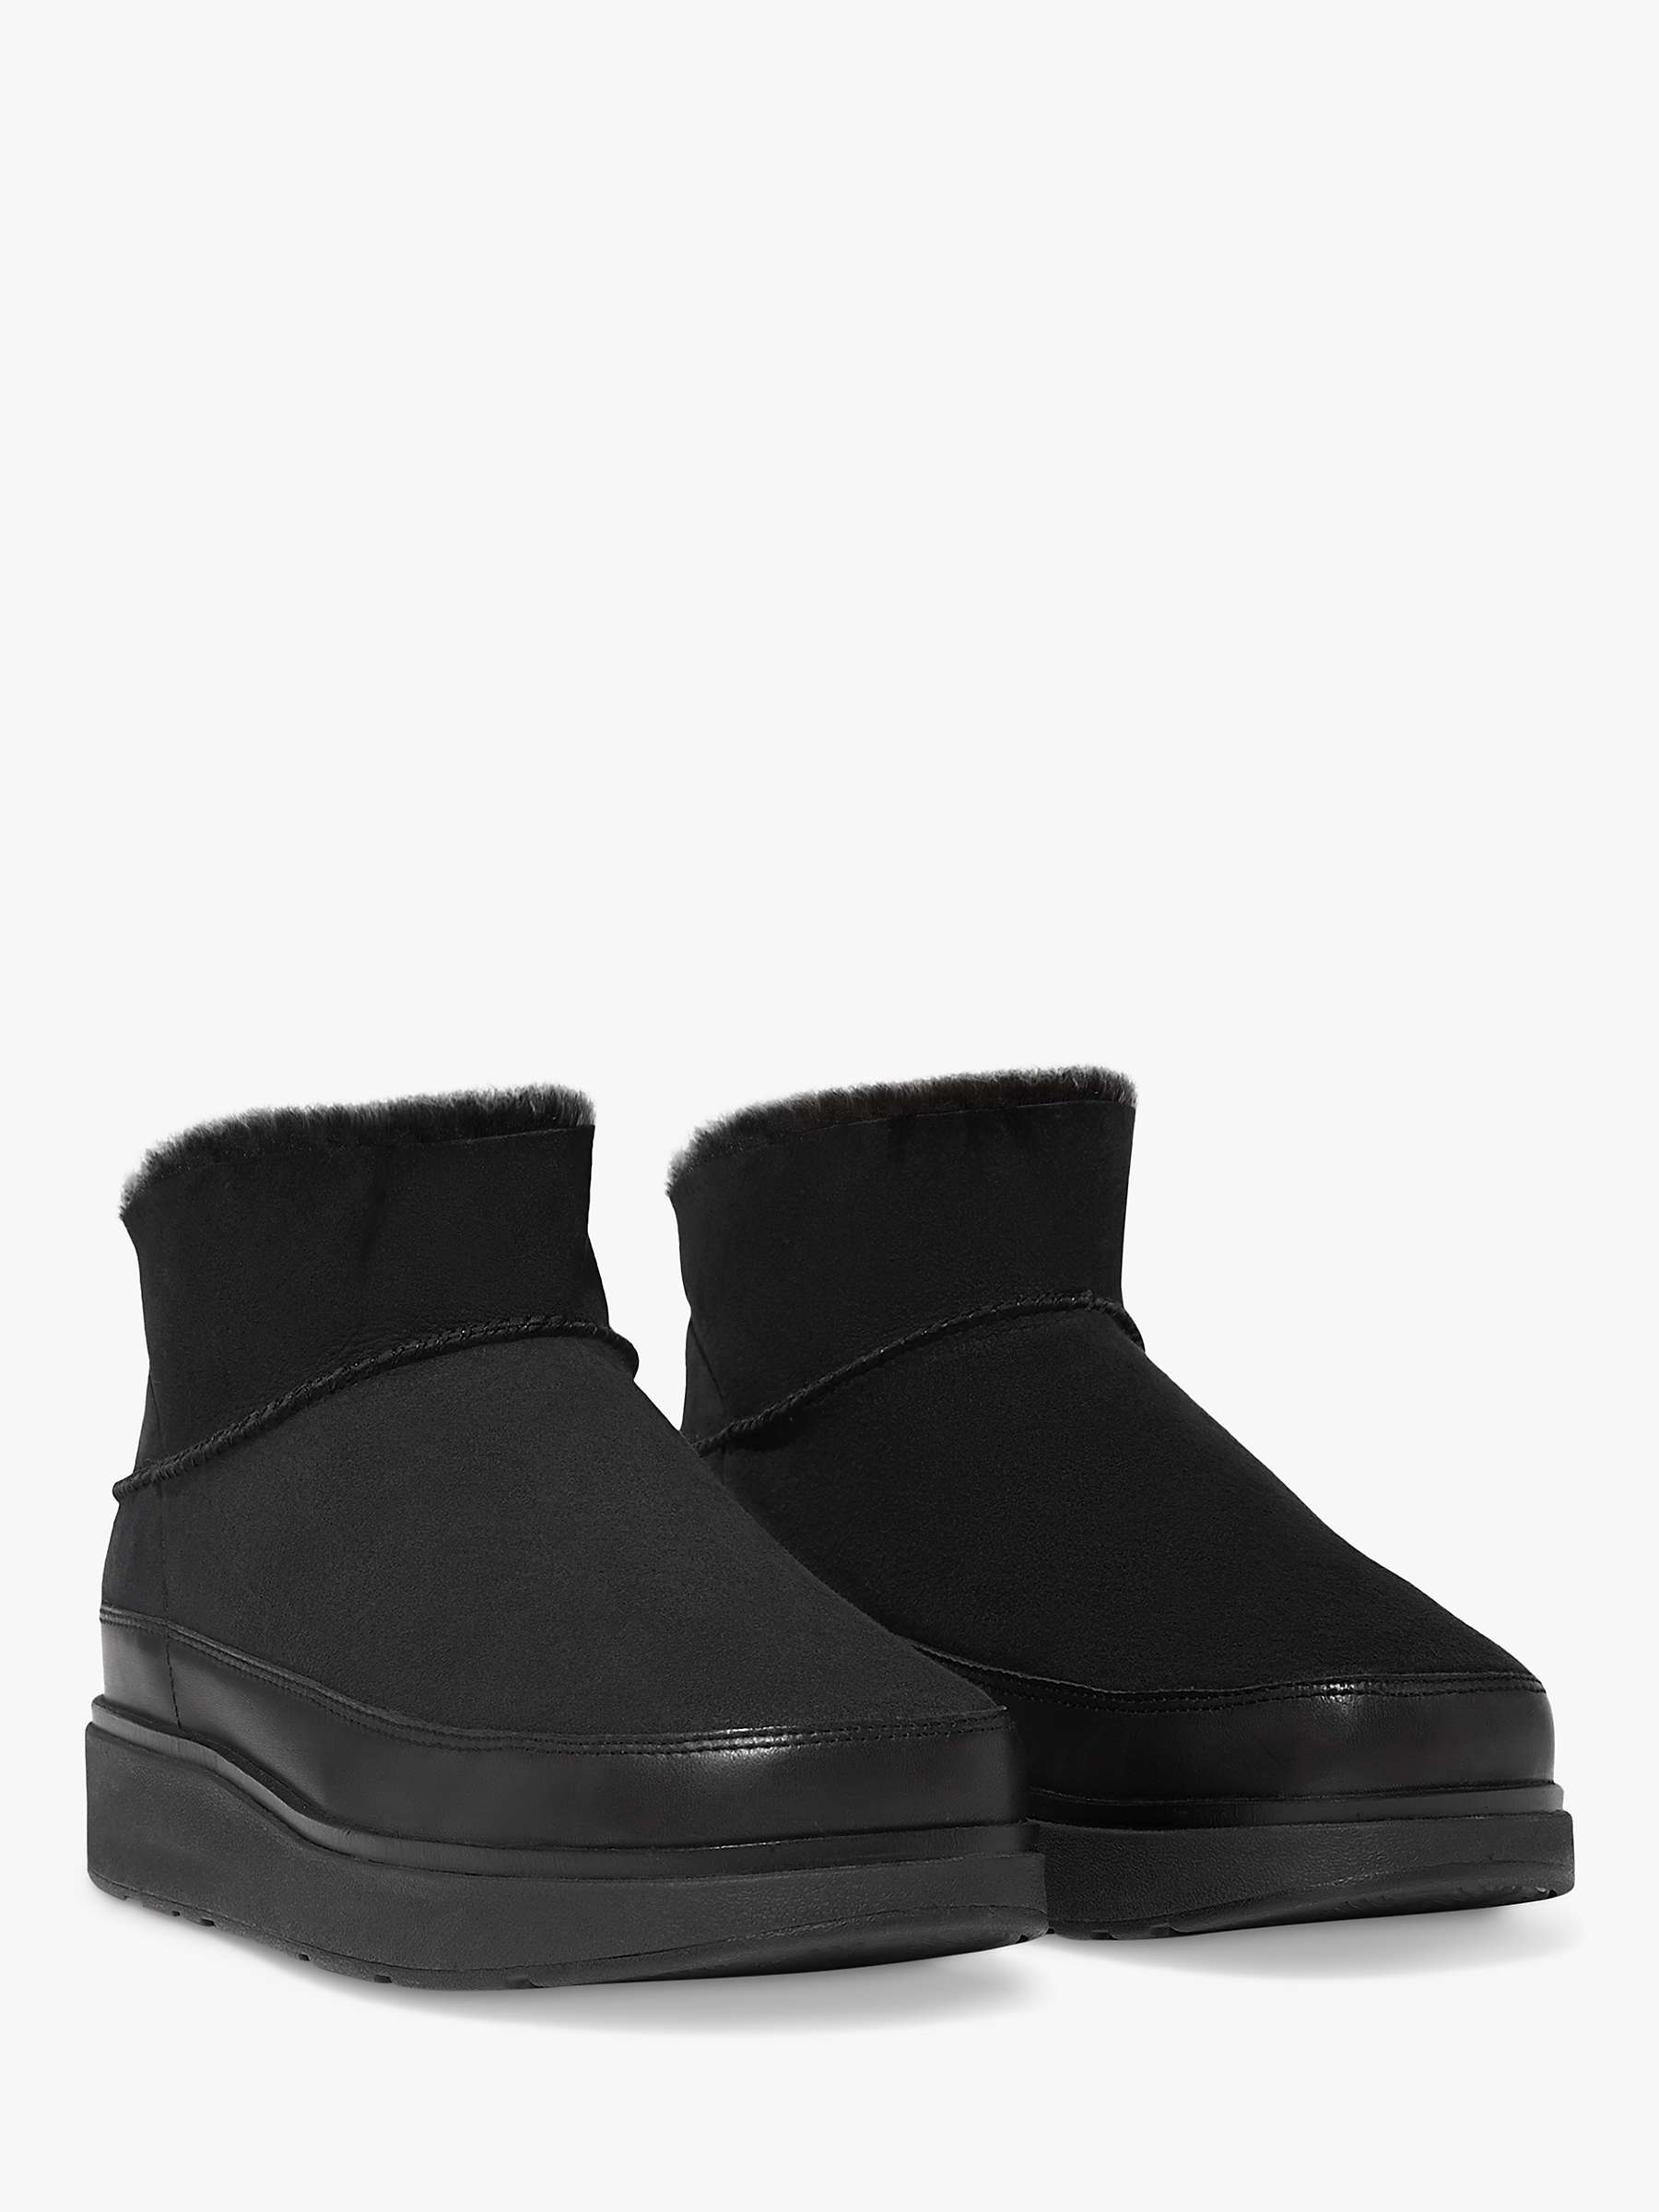 Buy FitFlop Gen FF Shearling Boots Online at johnlewis.com